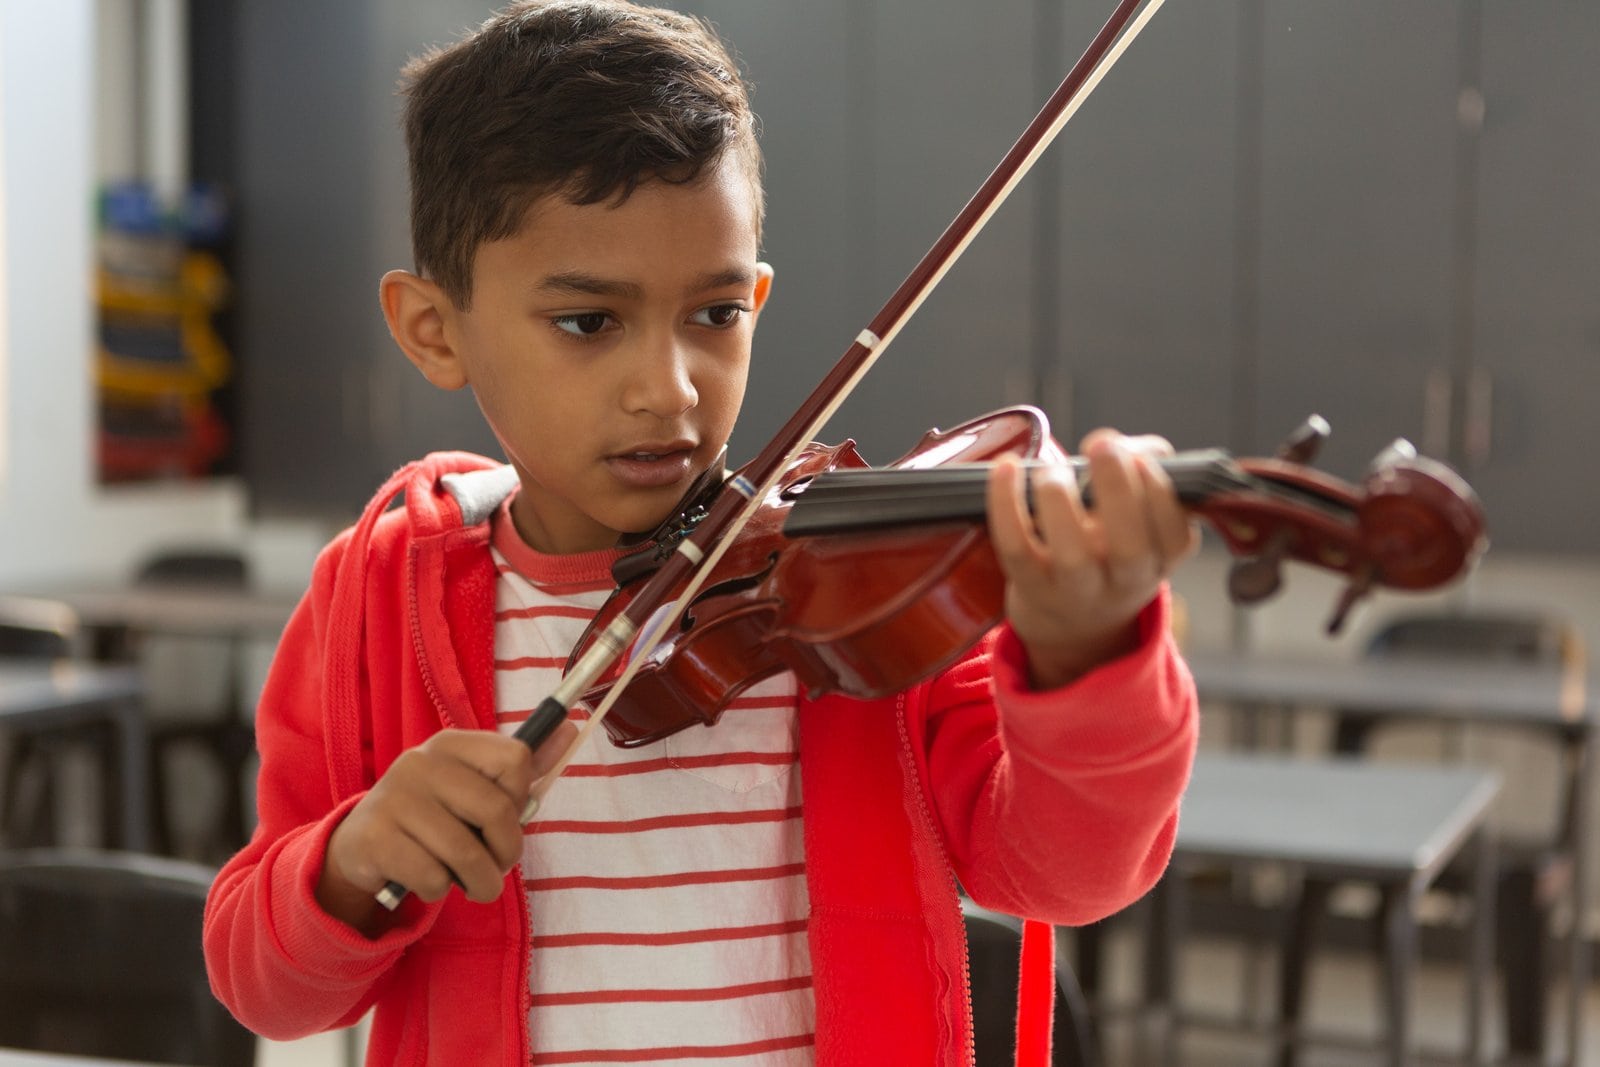 Learning violin as extracurricular activity